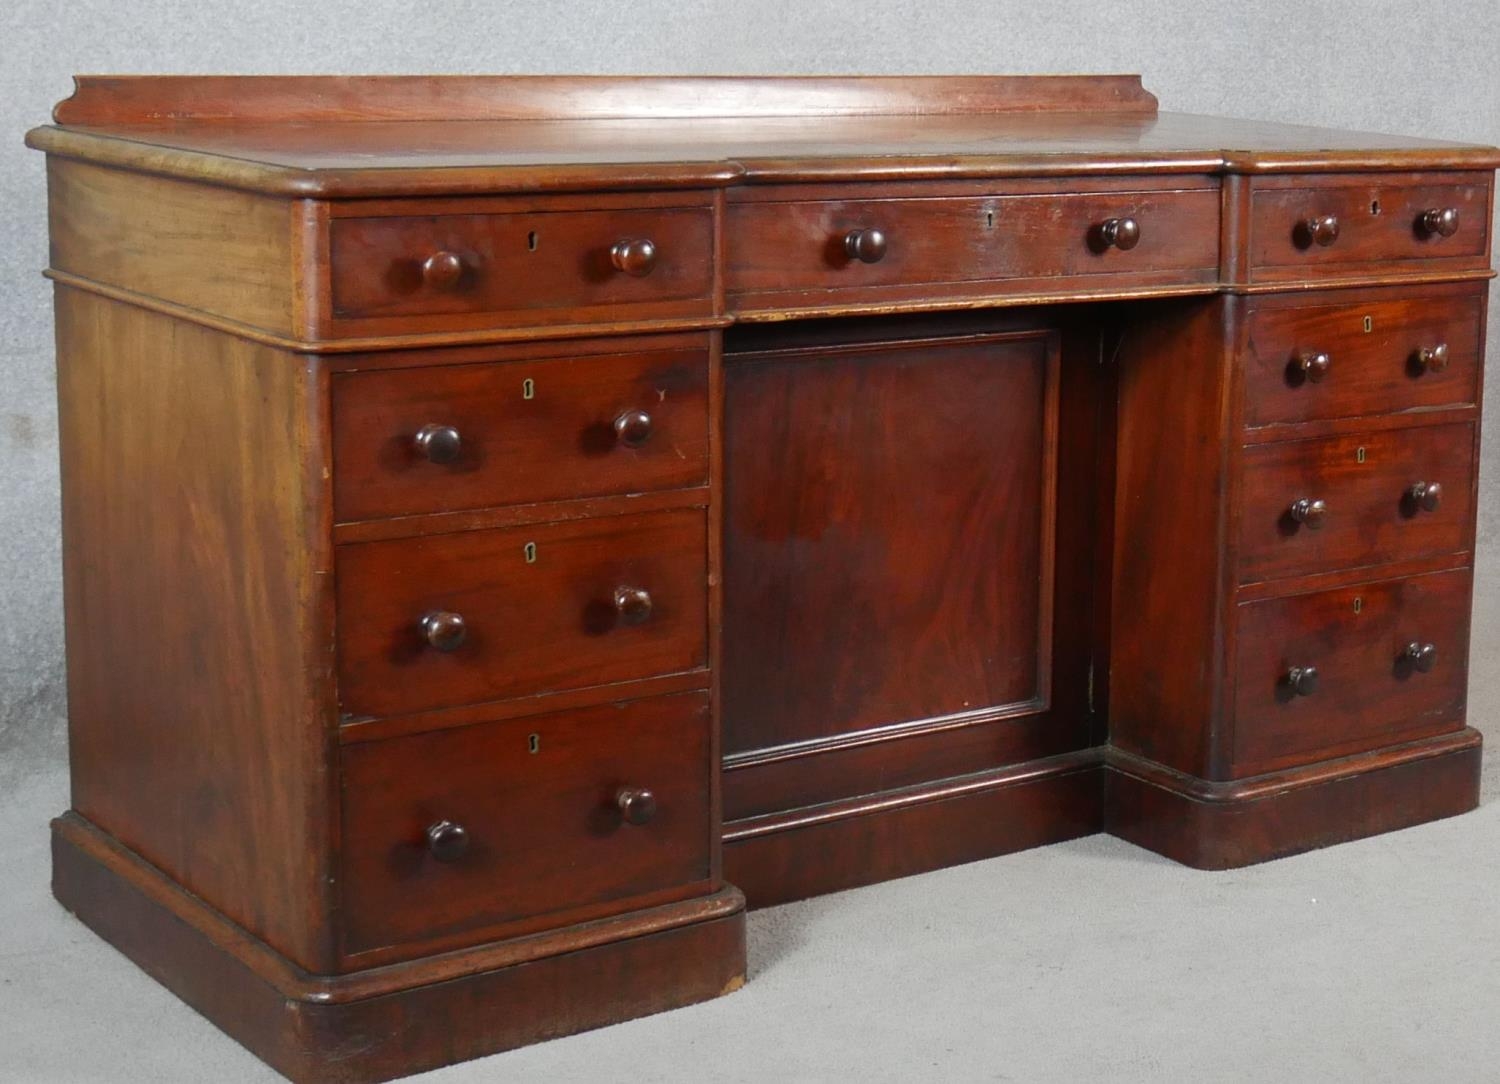 A 19th century mahogany pedestal desk with an arrangement of drawers and kneehole cupboard on plinth - Image 10 of 10